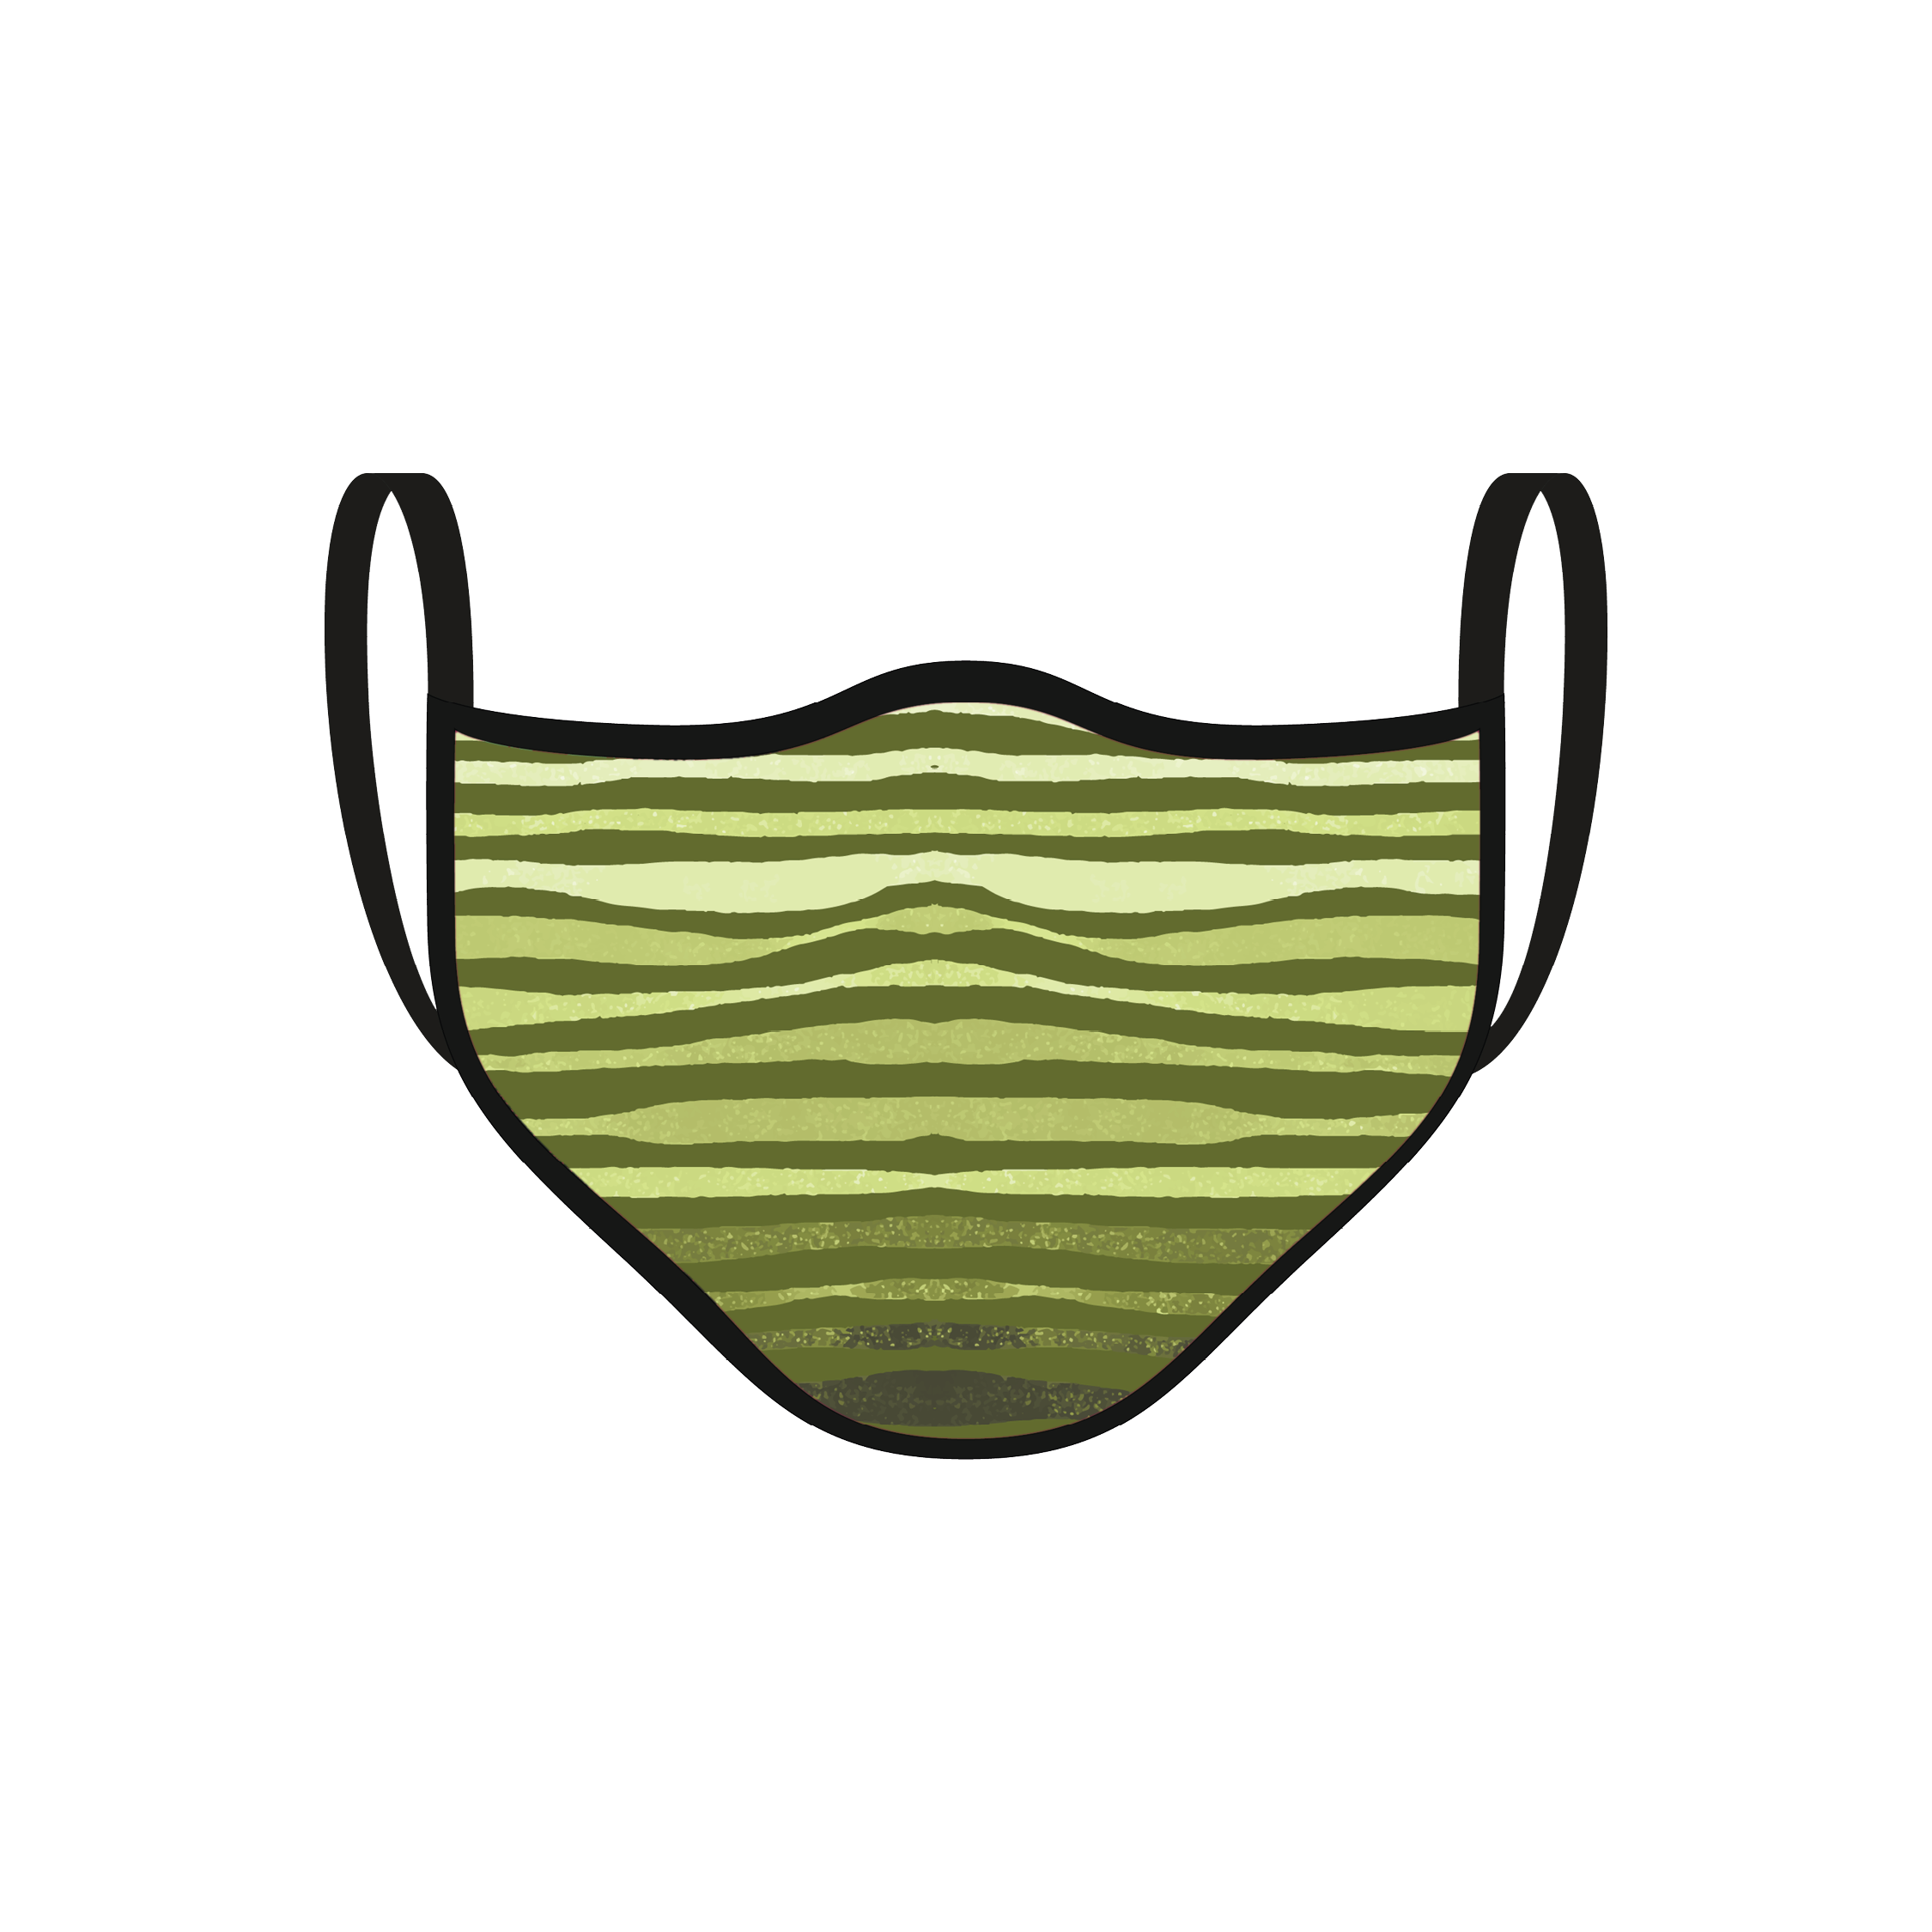 fashion-face-mask-current-lines-3.png